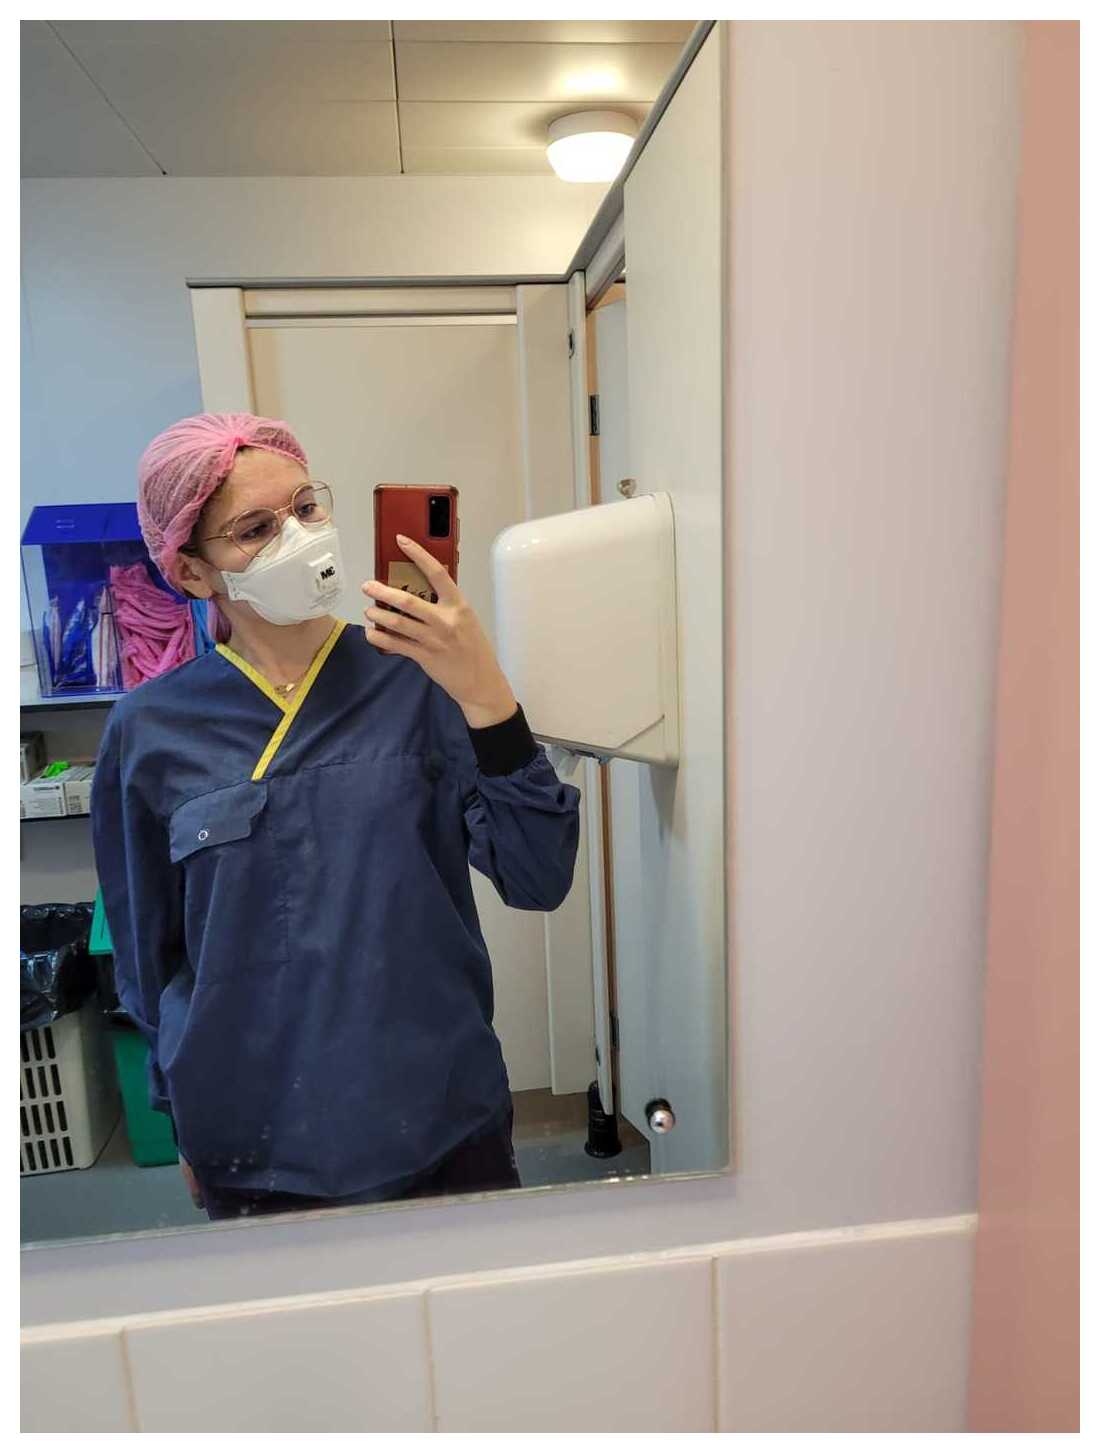 A student in full lab gear, including a face mask and hair net, taking a photo in a mirror